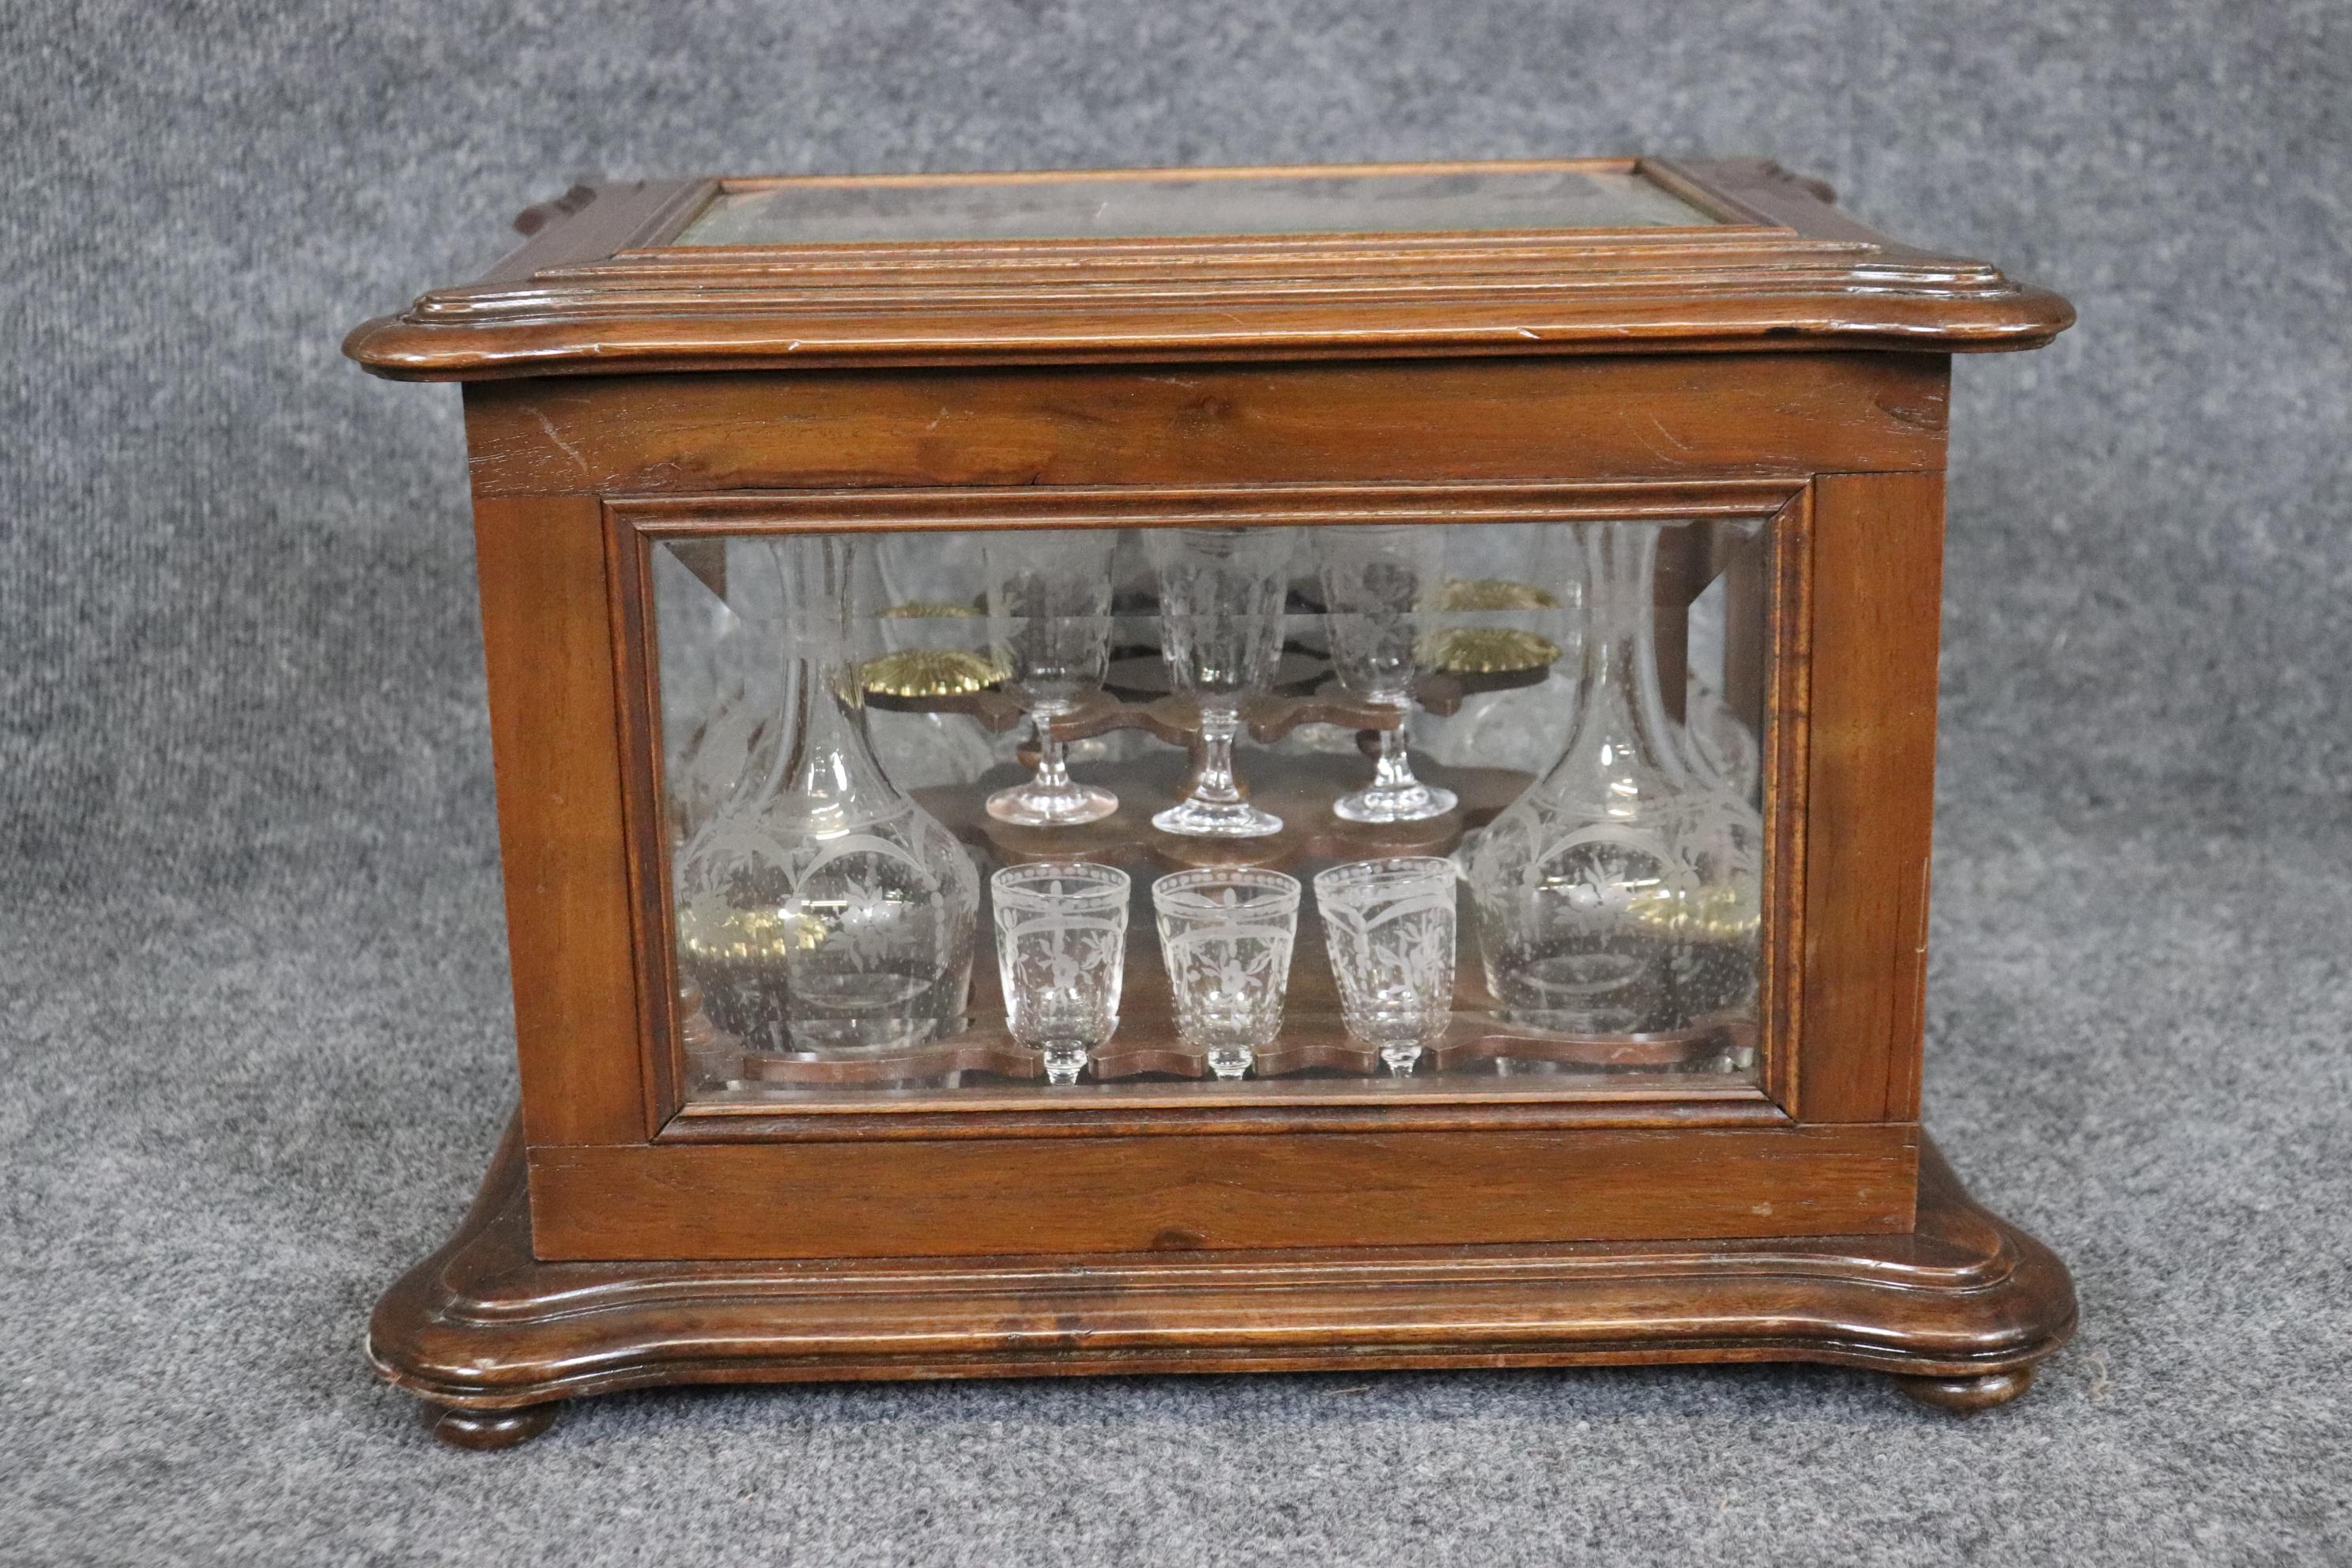 Late 19th Century Rare Walnut Case French Etched Glass 18-piece decanter and Cordial Tantalus Set For Sale